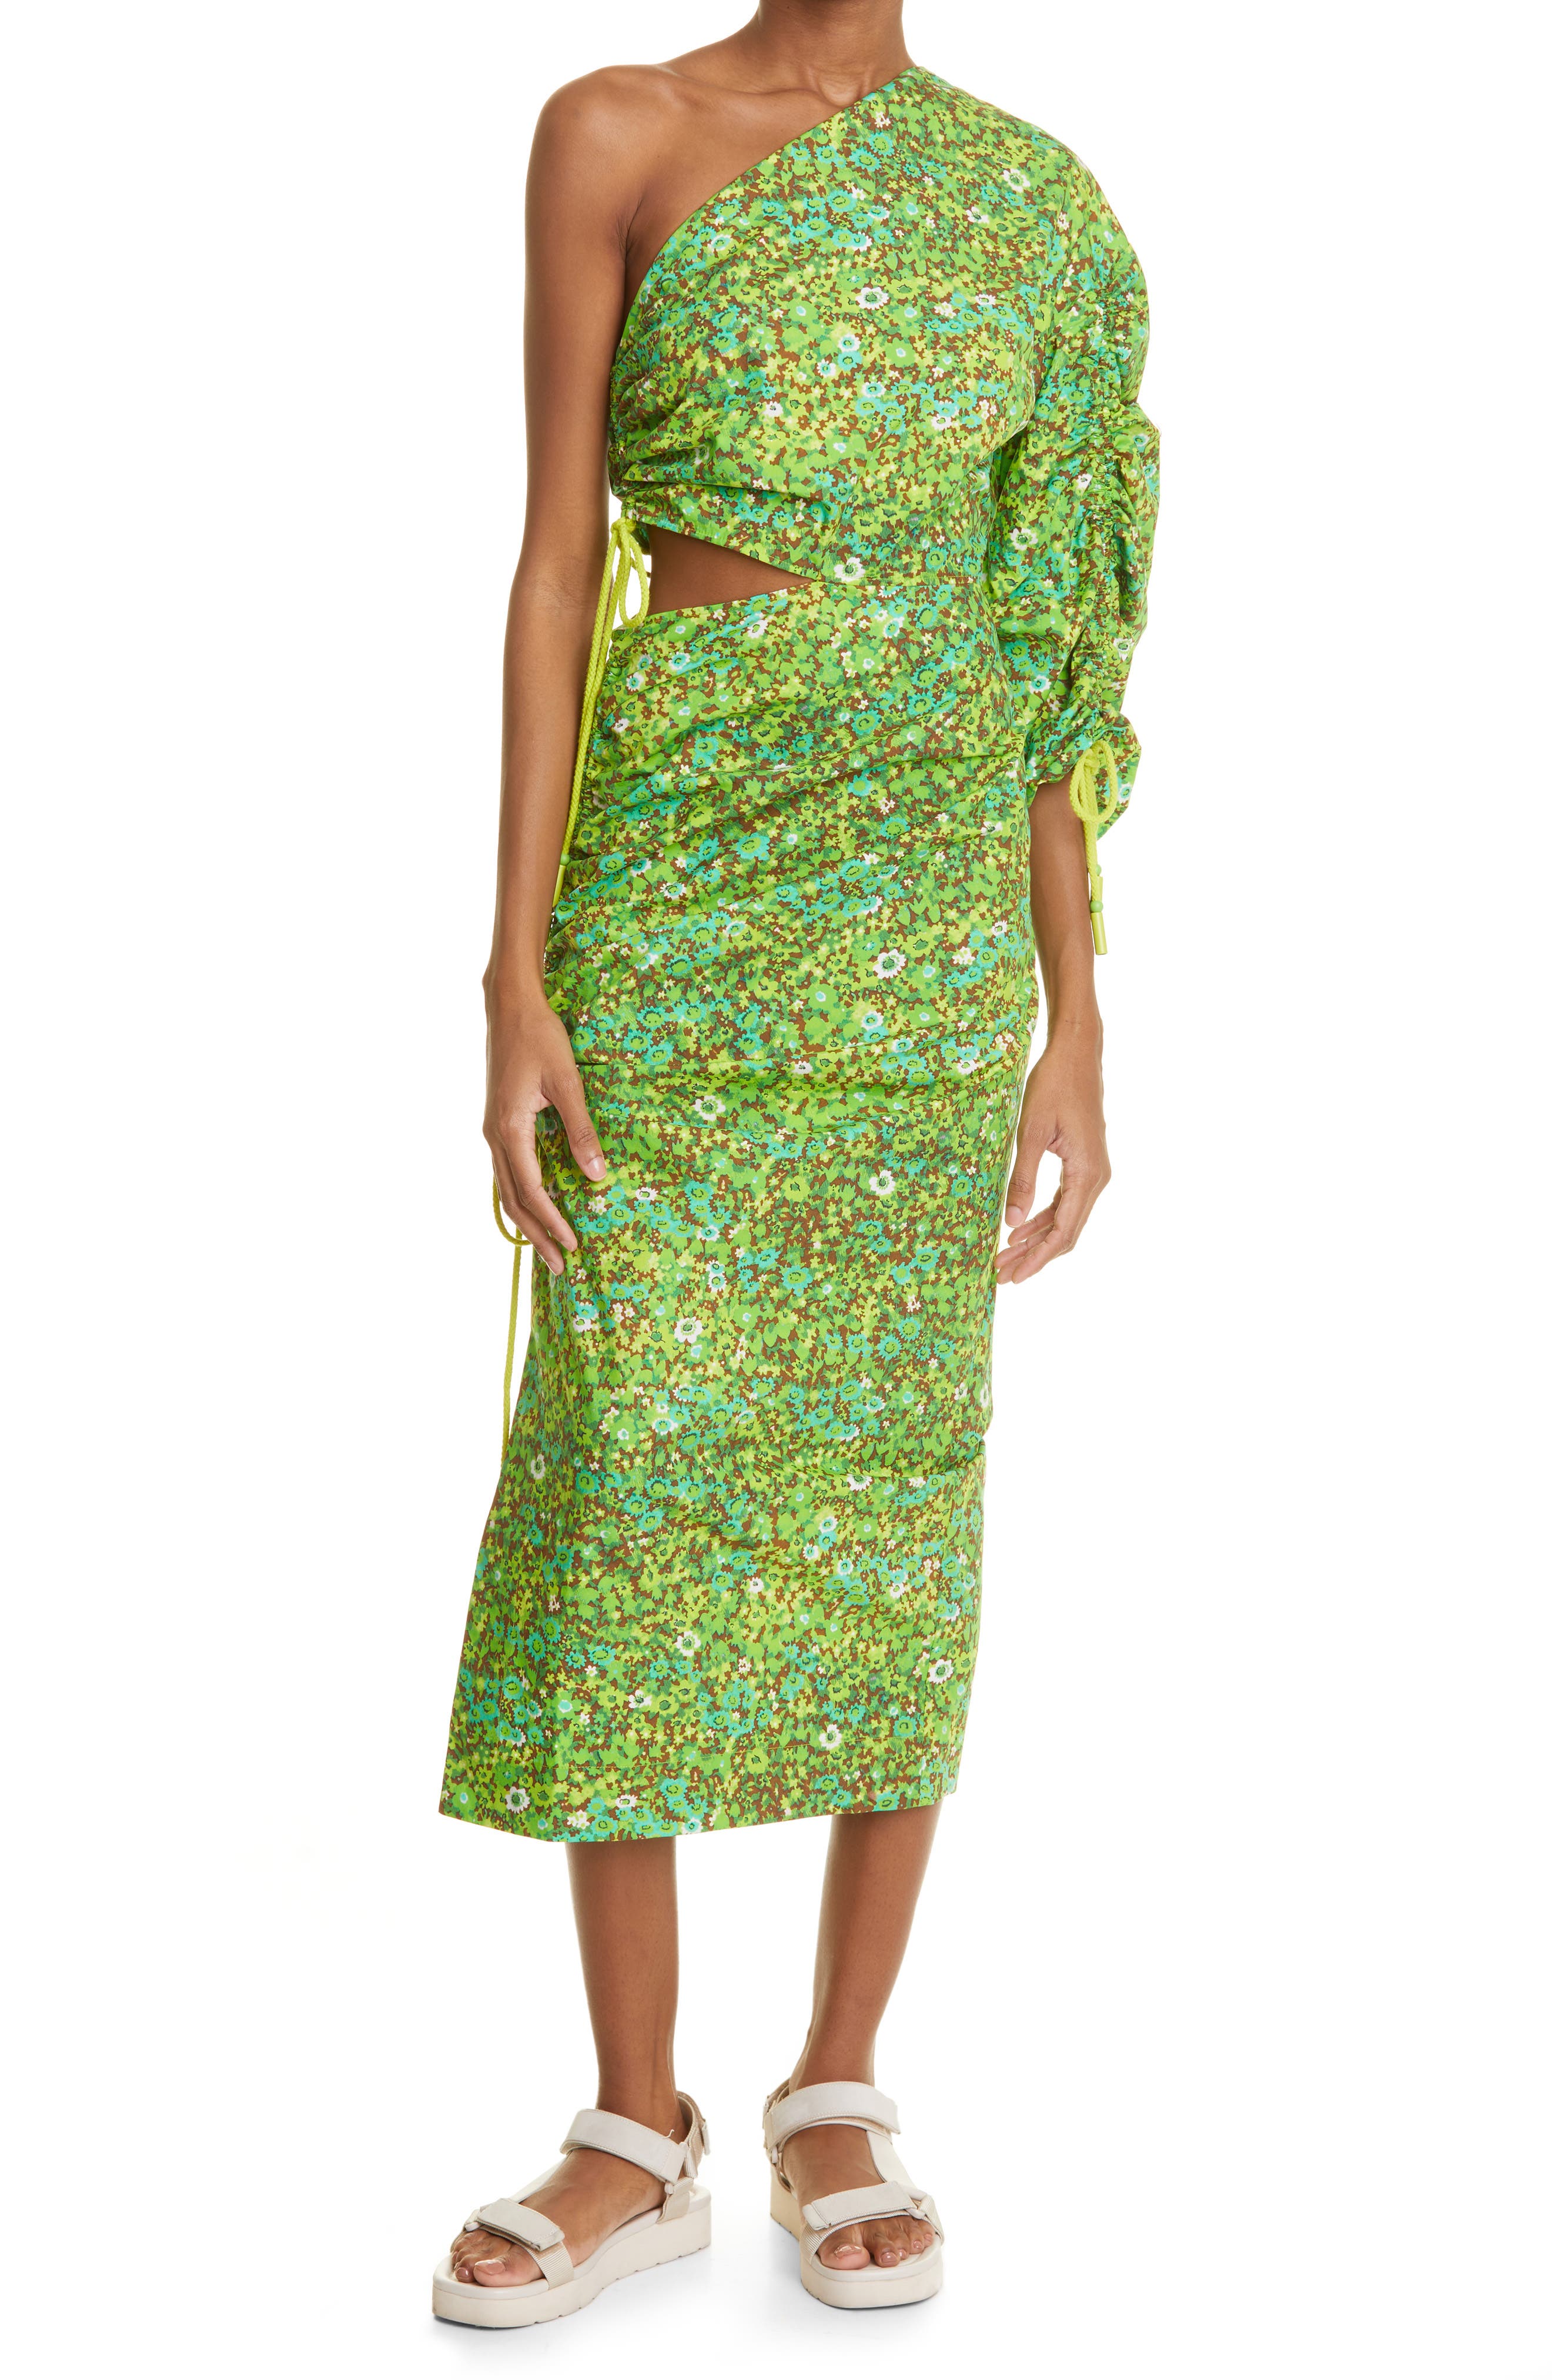 ALEMAIS Phyllis Ruched One-Shoulder Organic Cotton Dress in Acid Green at Nordstrom, Size 8